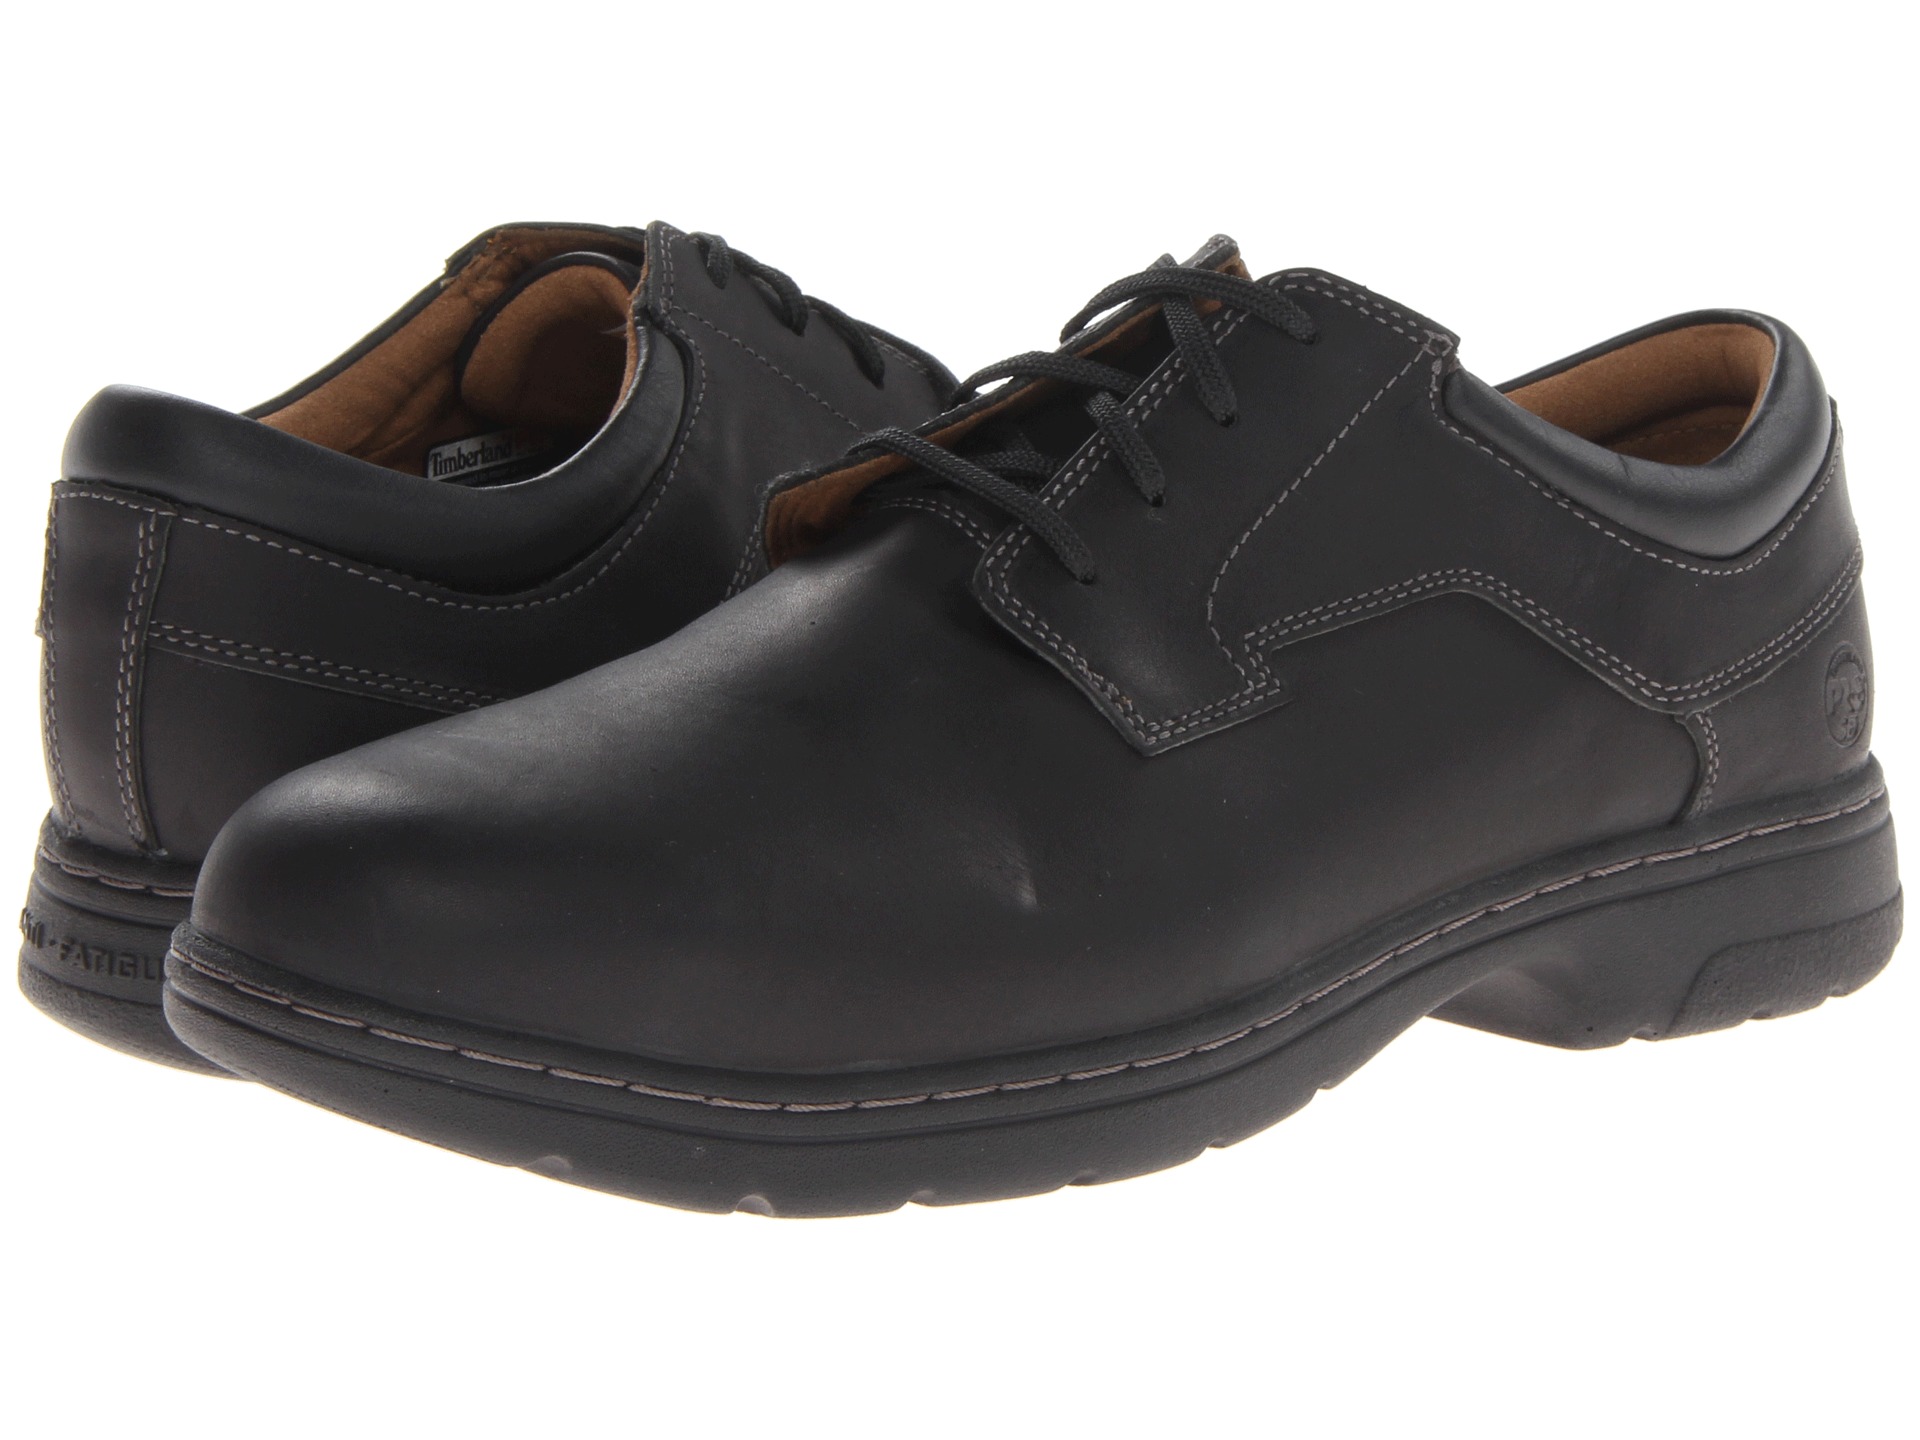 Timberland PRO Branston ESD Safety Toe Oxford at Zappos.com